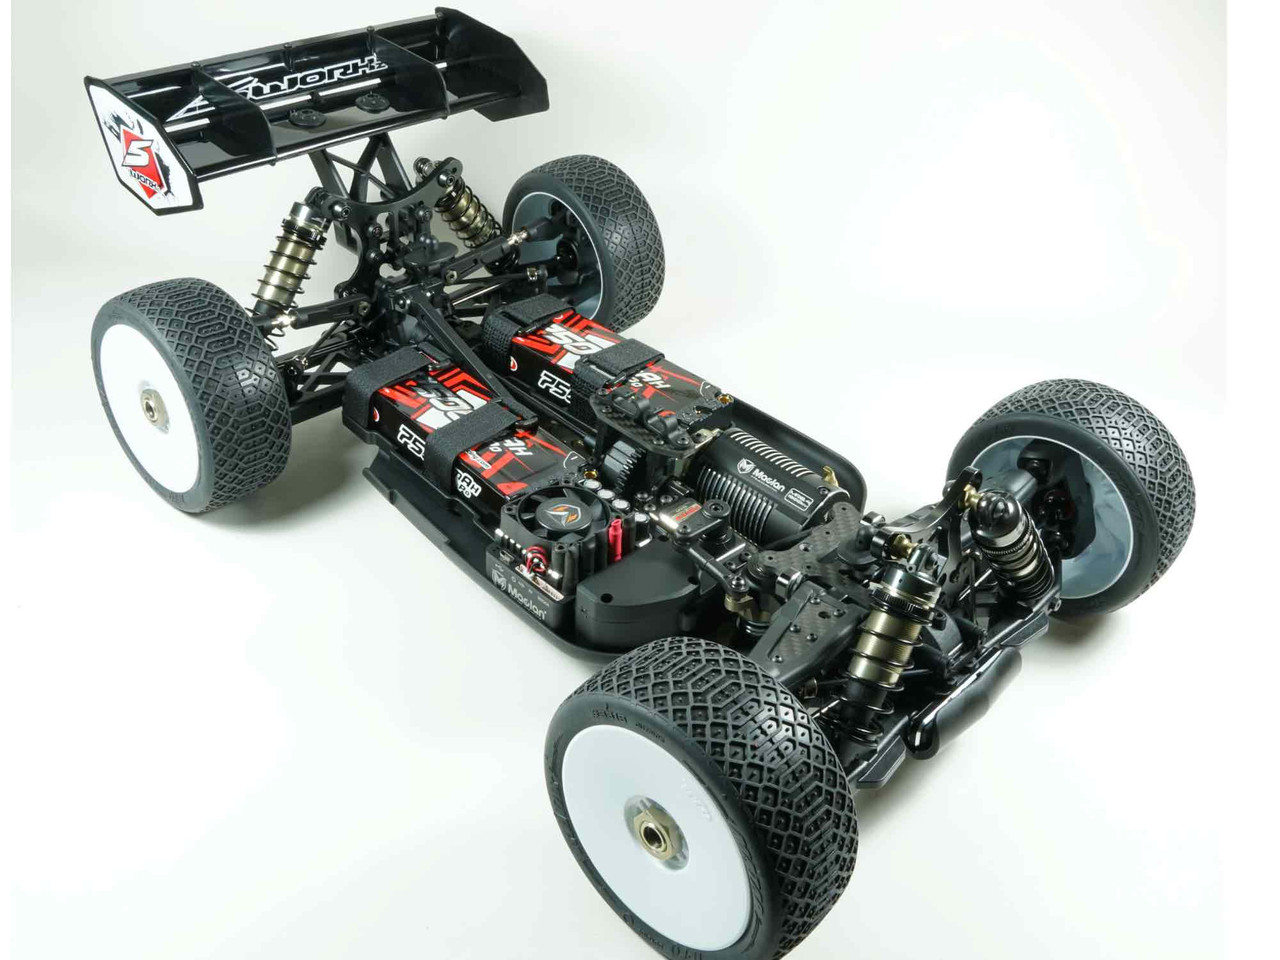 🤙New RC Buggy Drop! Presenting the Kraze - go krazy on or off track 🎉  With upgraded Aluminium swing arm sets as stock for better handling and an  S540